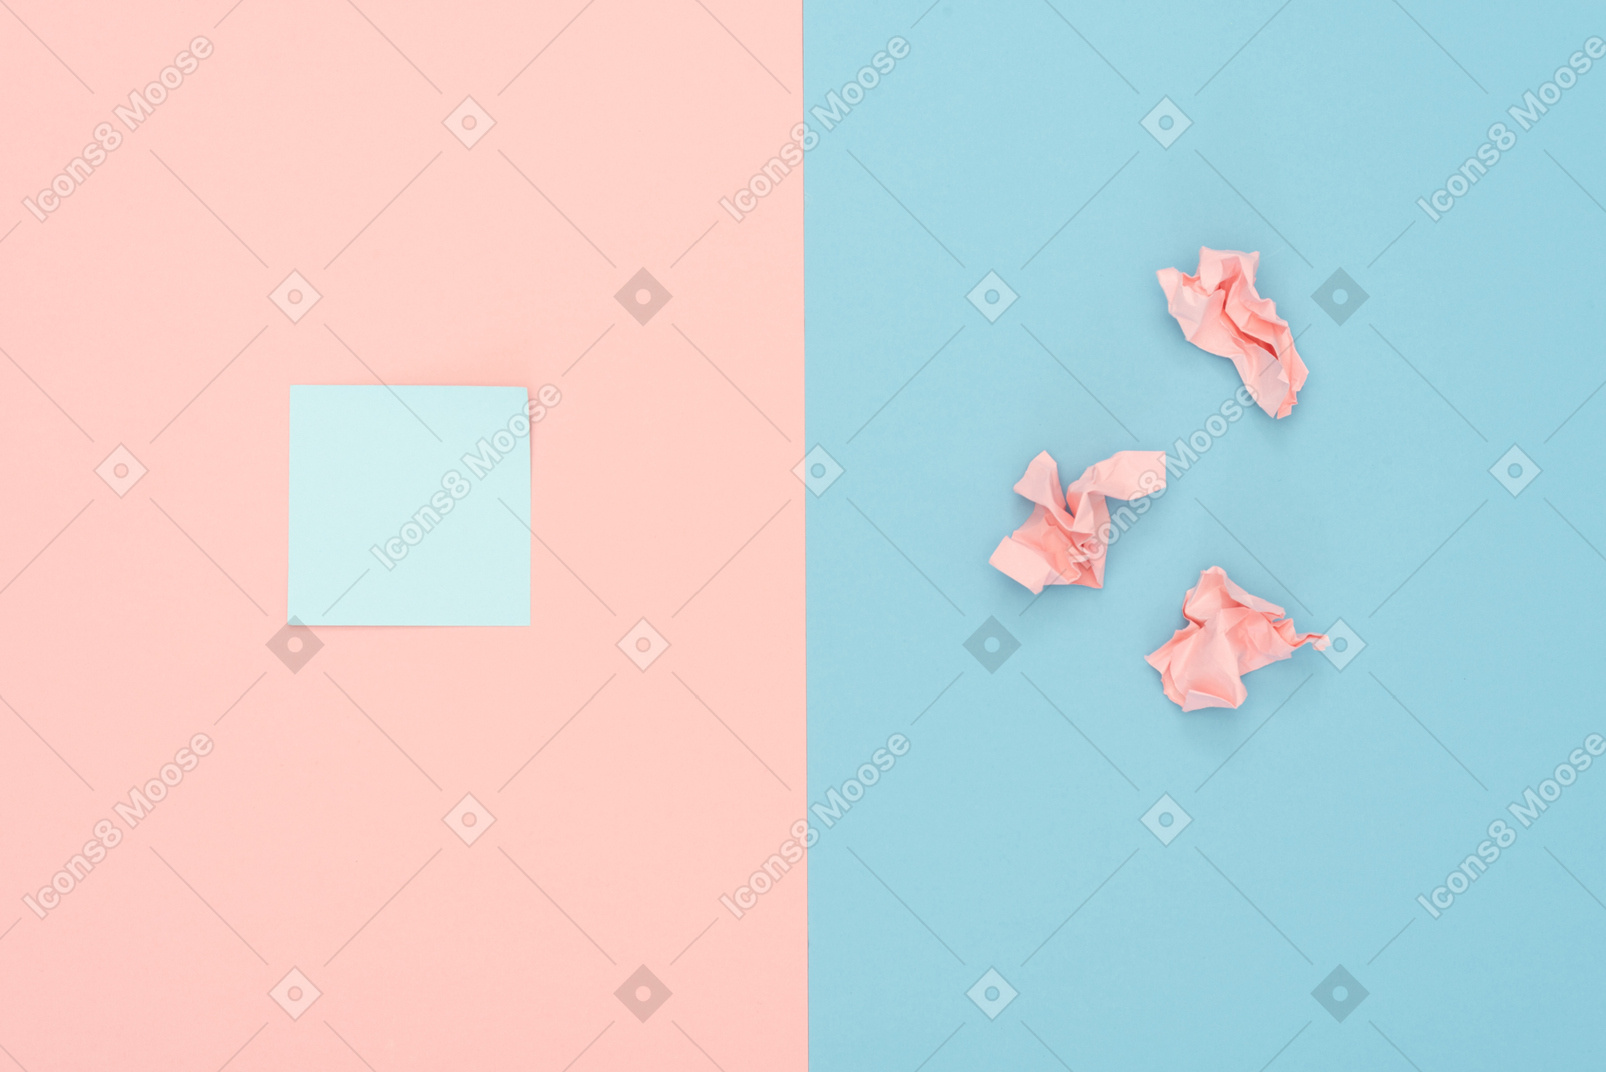 Crumpled paper sheets and blank sticky note over contrast background